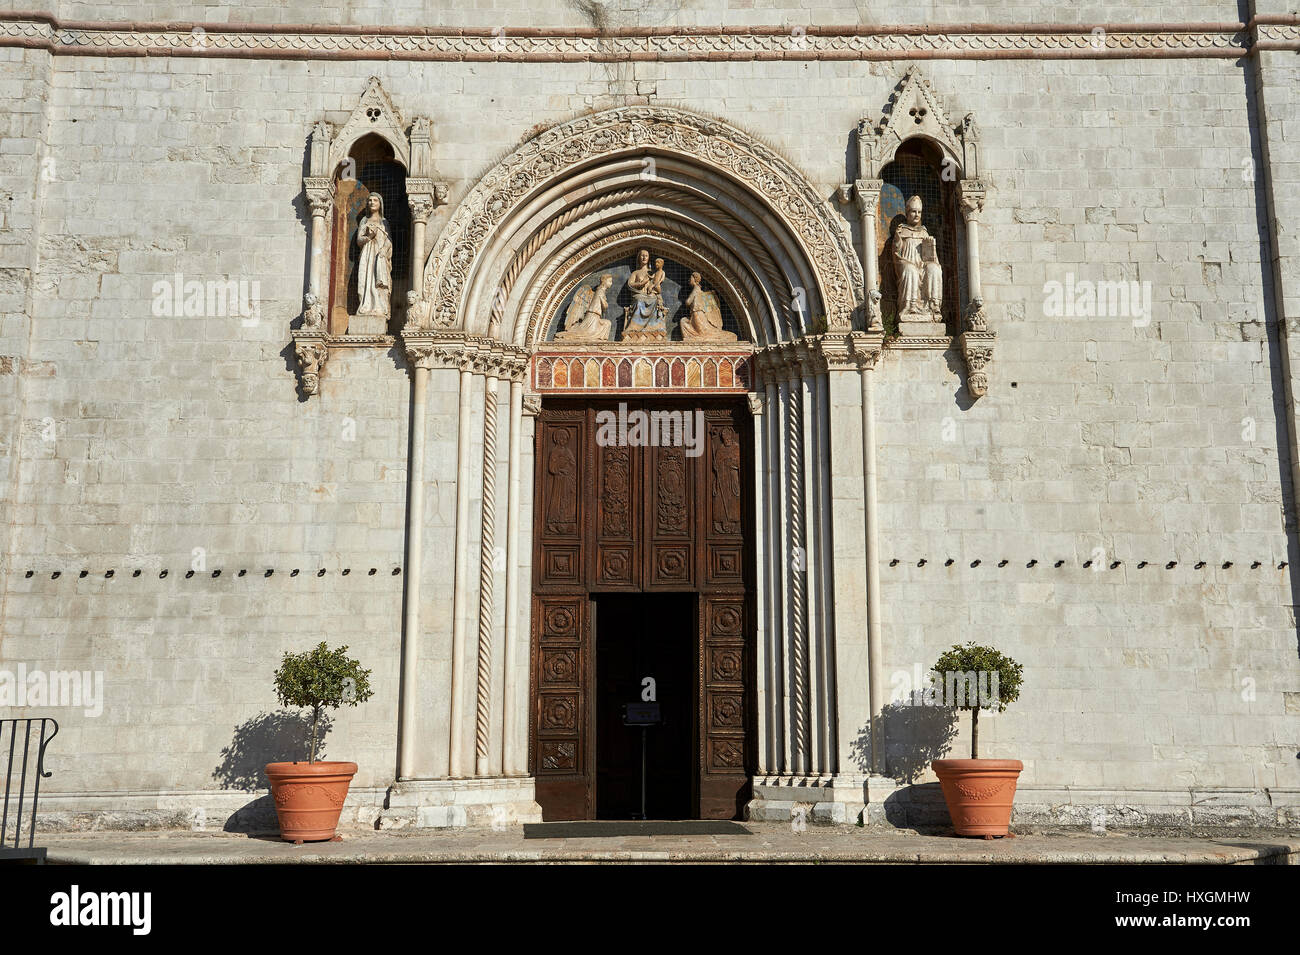 The Gothic facade of the church of St. Benedict, before the 2106 earthquake, Piazza San Benedetto, Norcia, Umbria, Italy Stock Photo